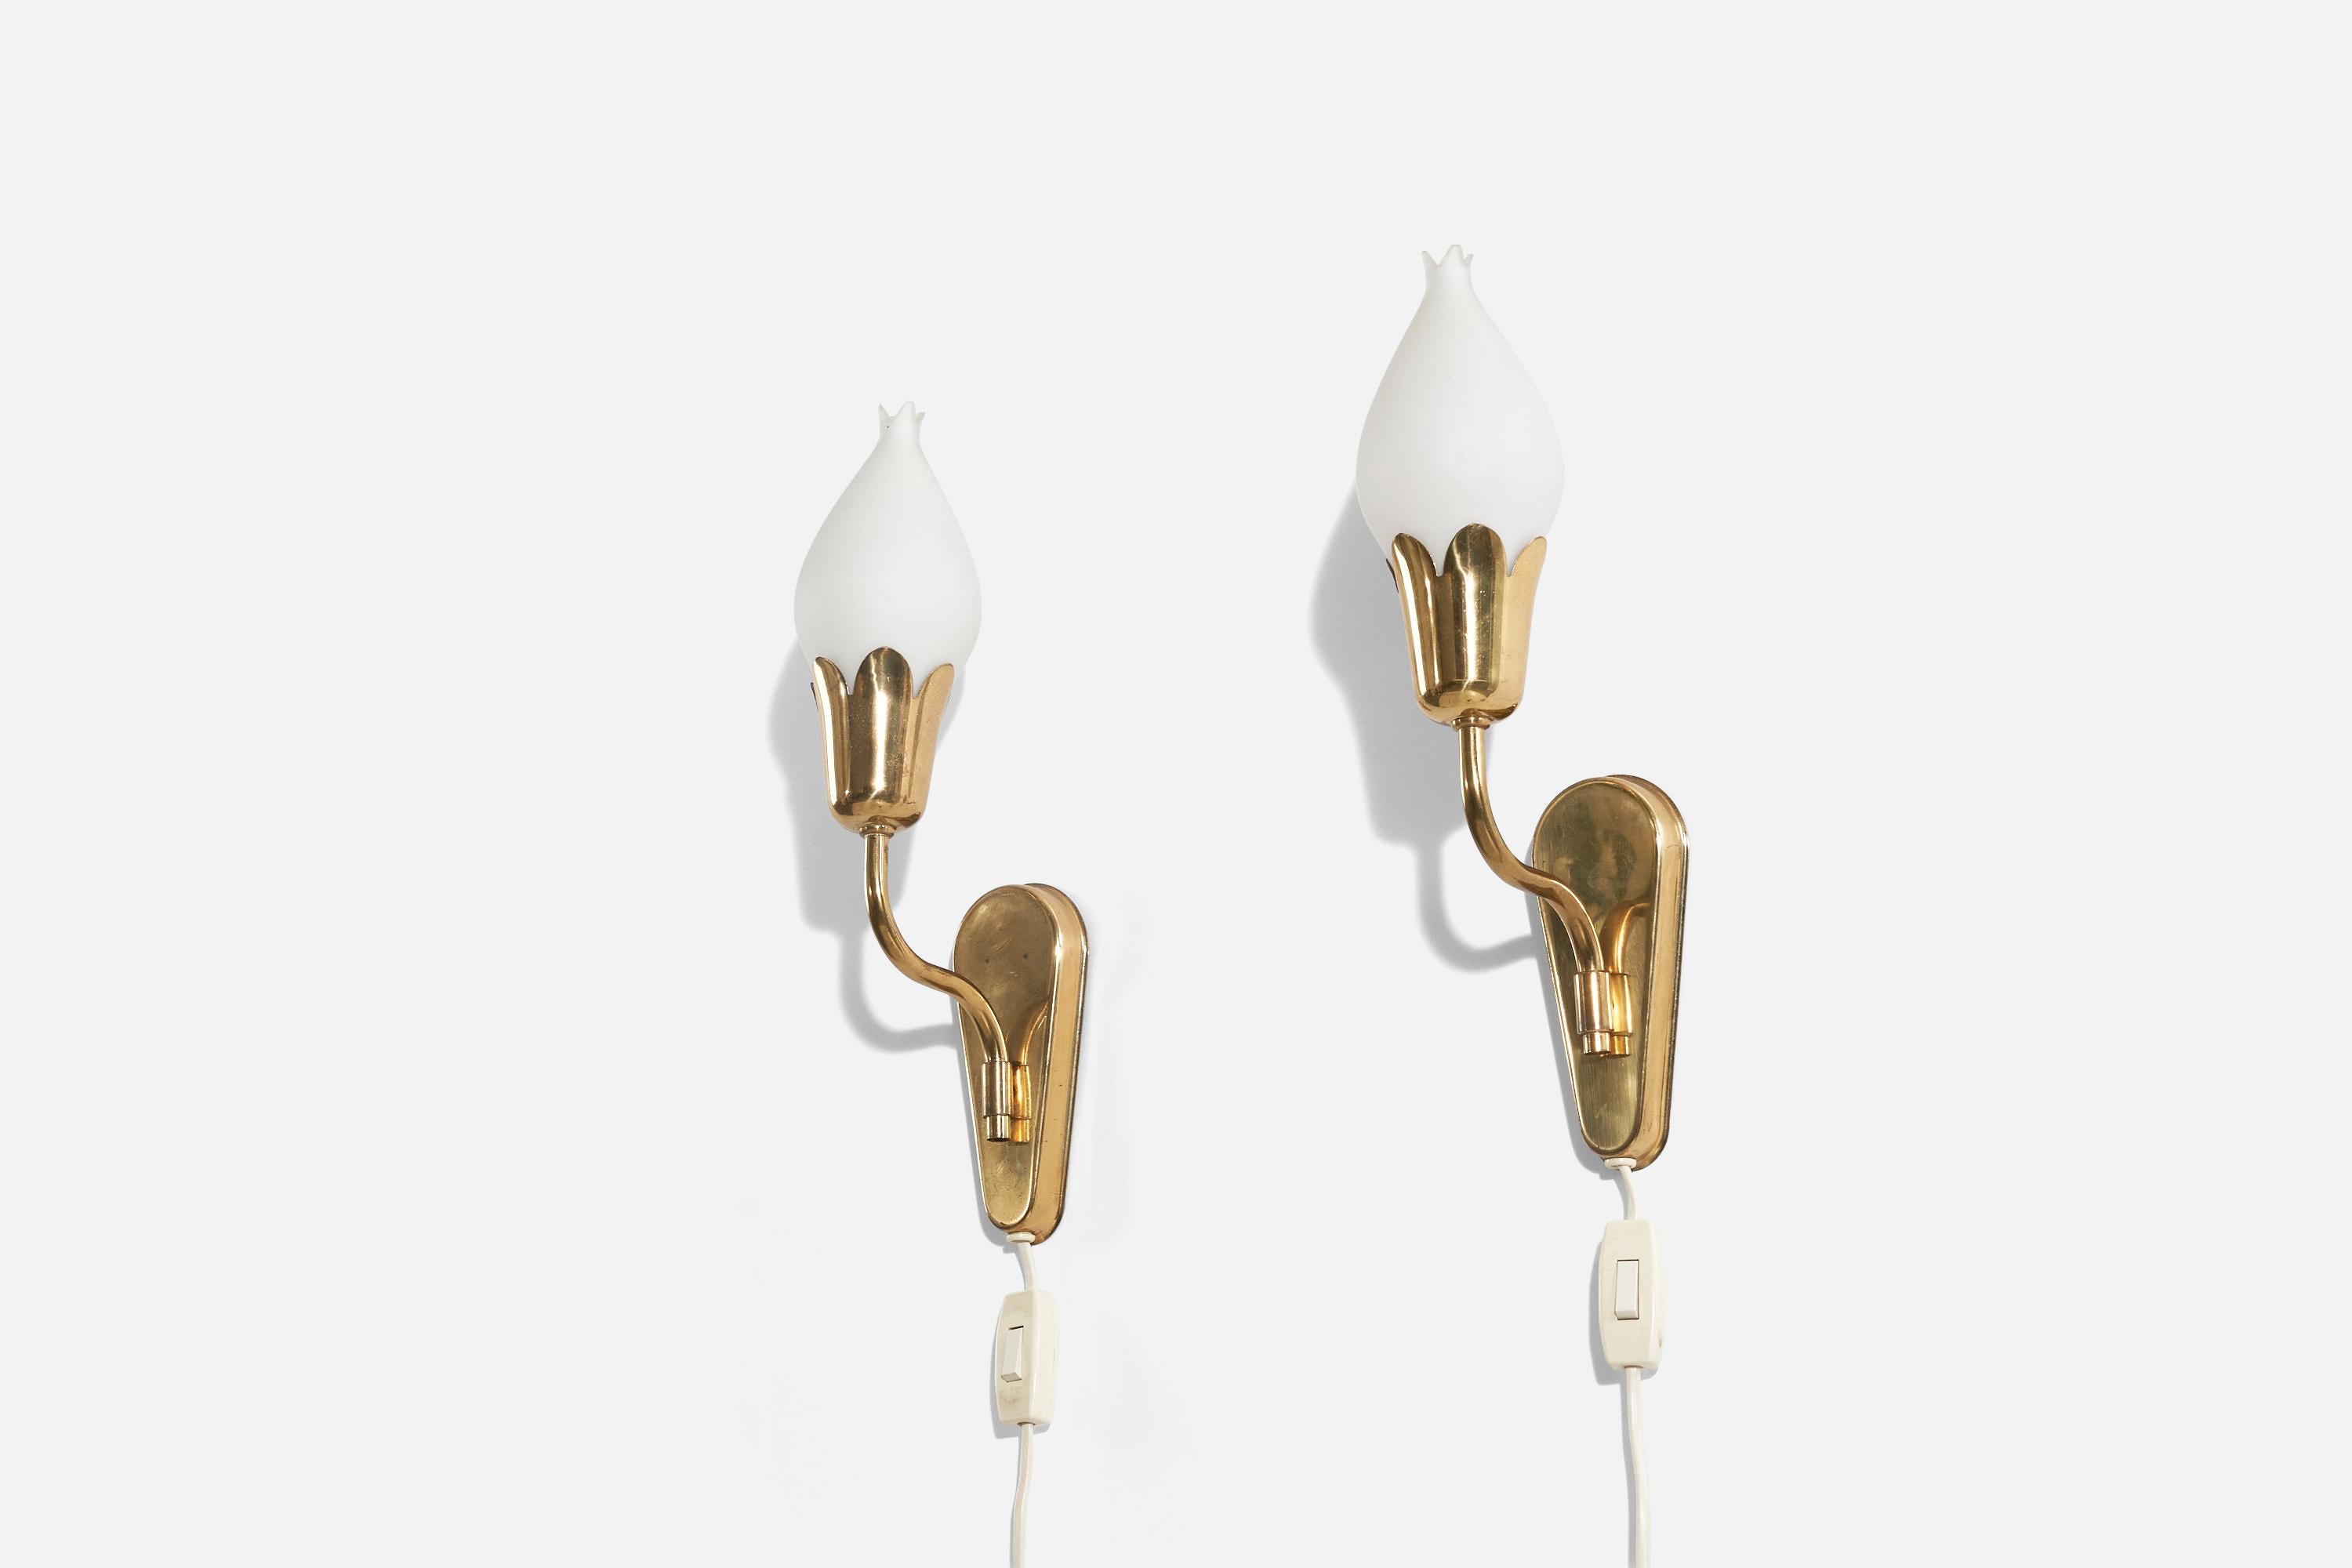 A pair of brass and glass wall lights designed and produced by Fog & Mørup, Denmark, c. 1950s.

Dimensions of back plate (inches) : 6.01 x 2.48 x 0.66 (H x W x D).